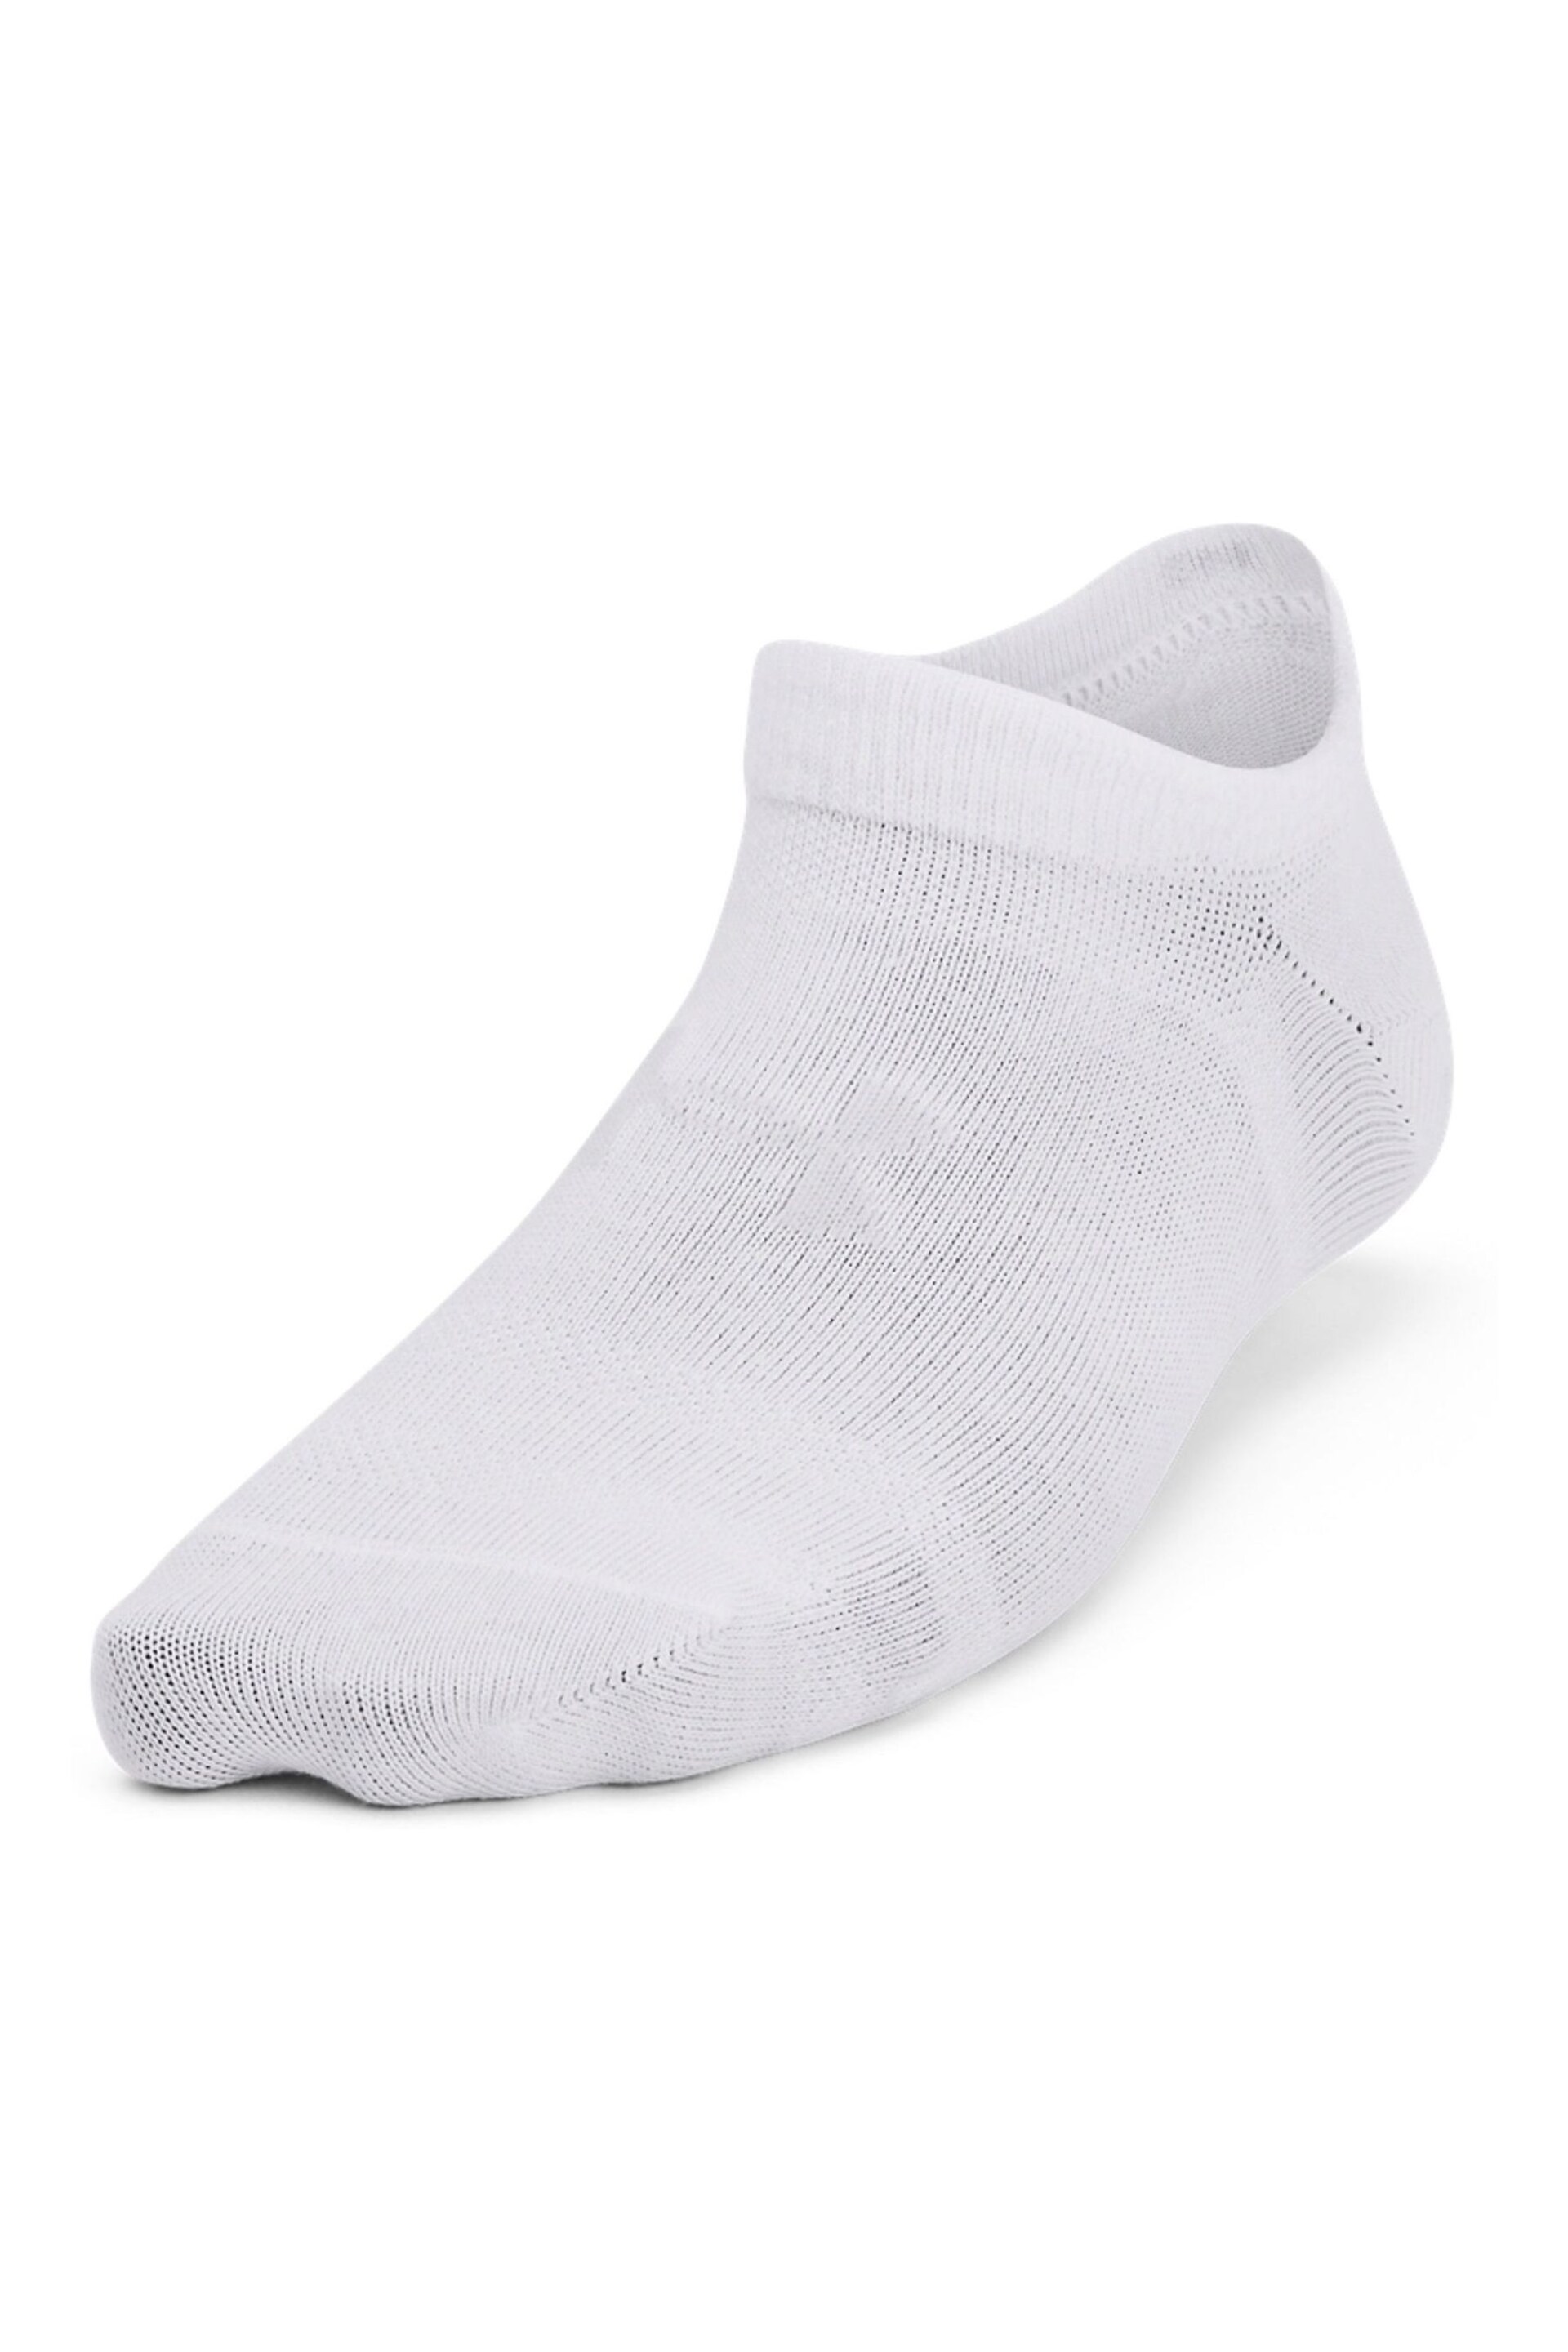 Under Armour Youth Essential No Show White Socks 6 Pack - Image 3 of 4